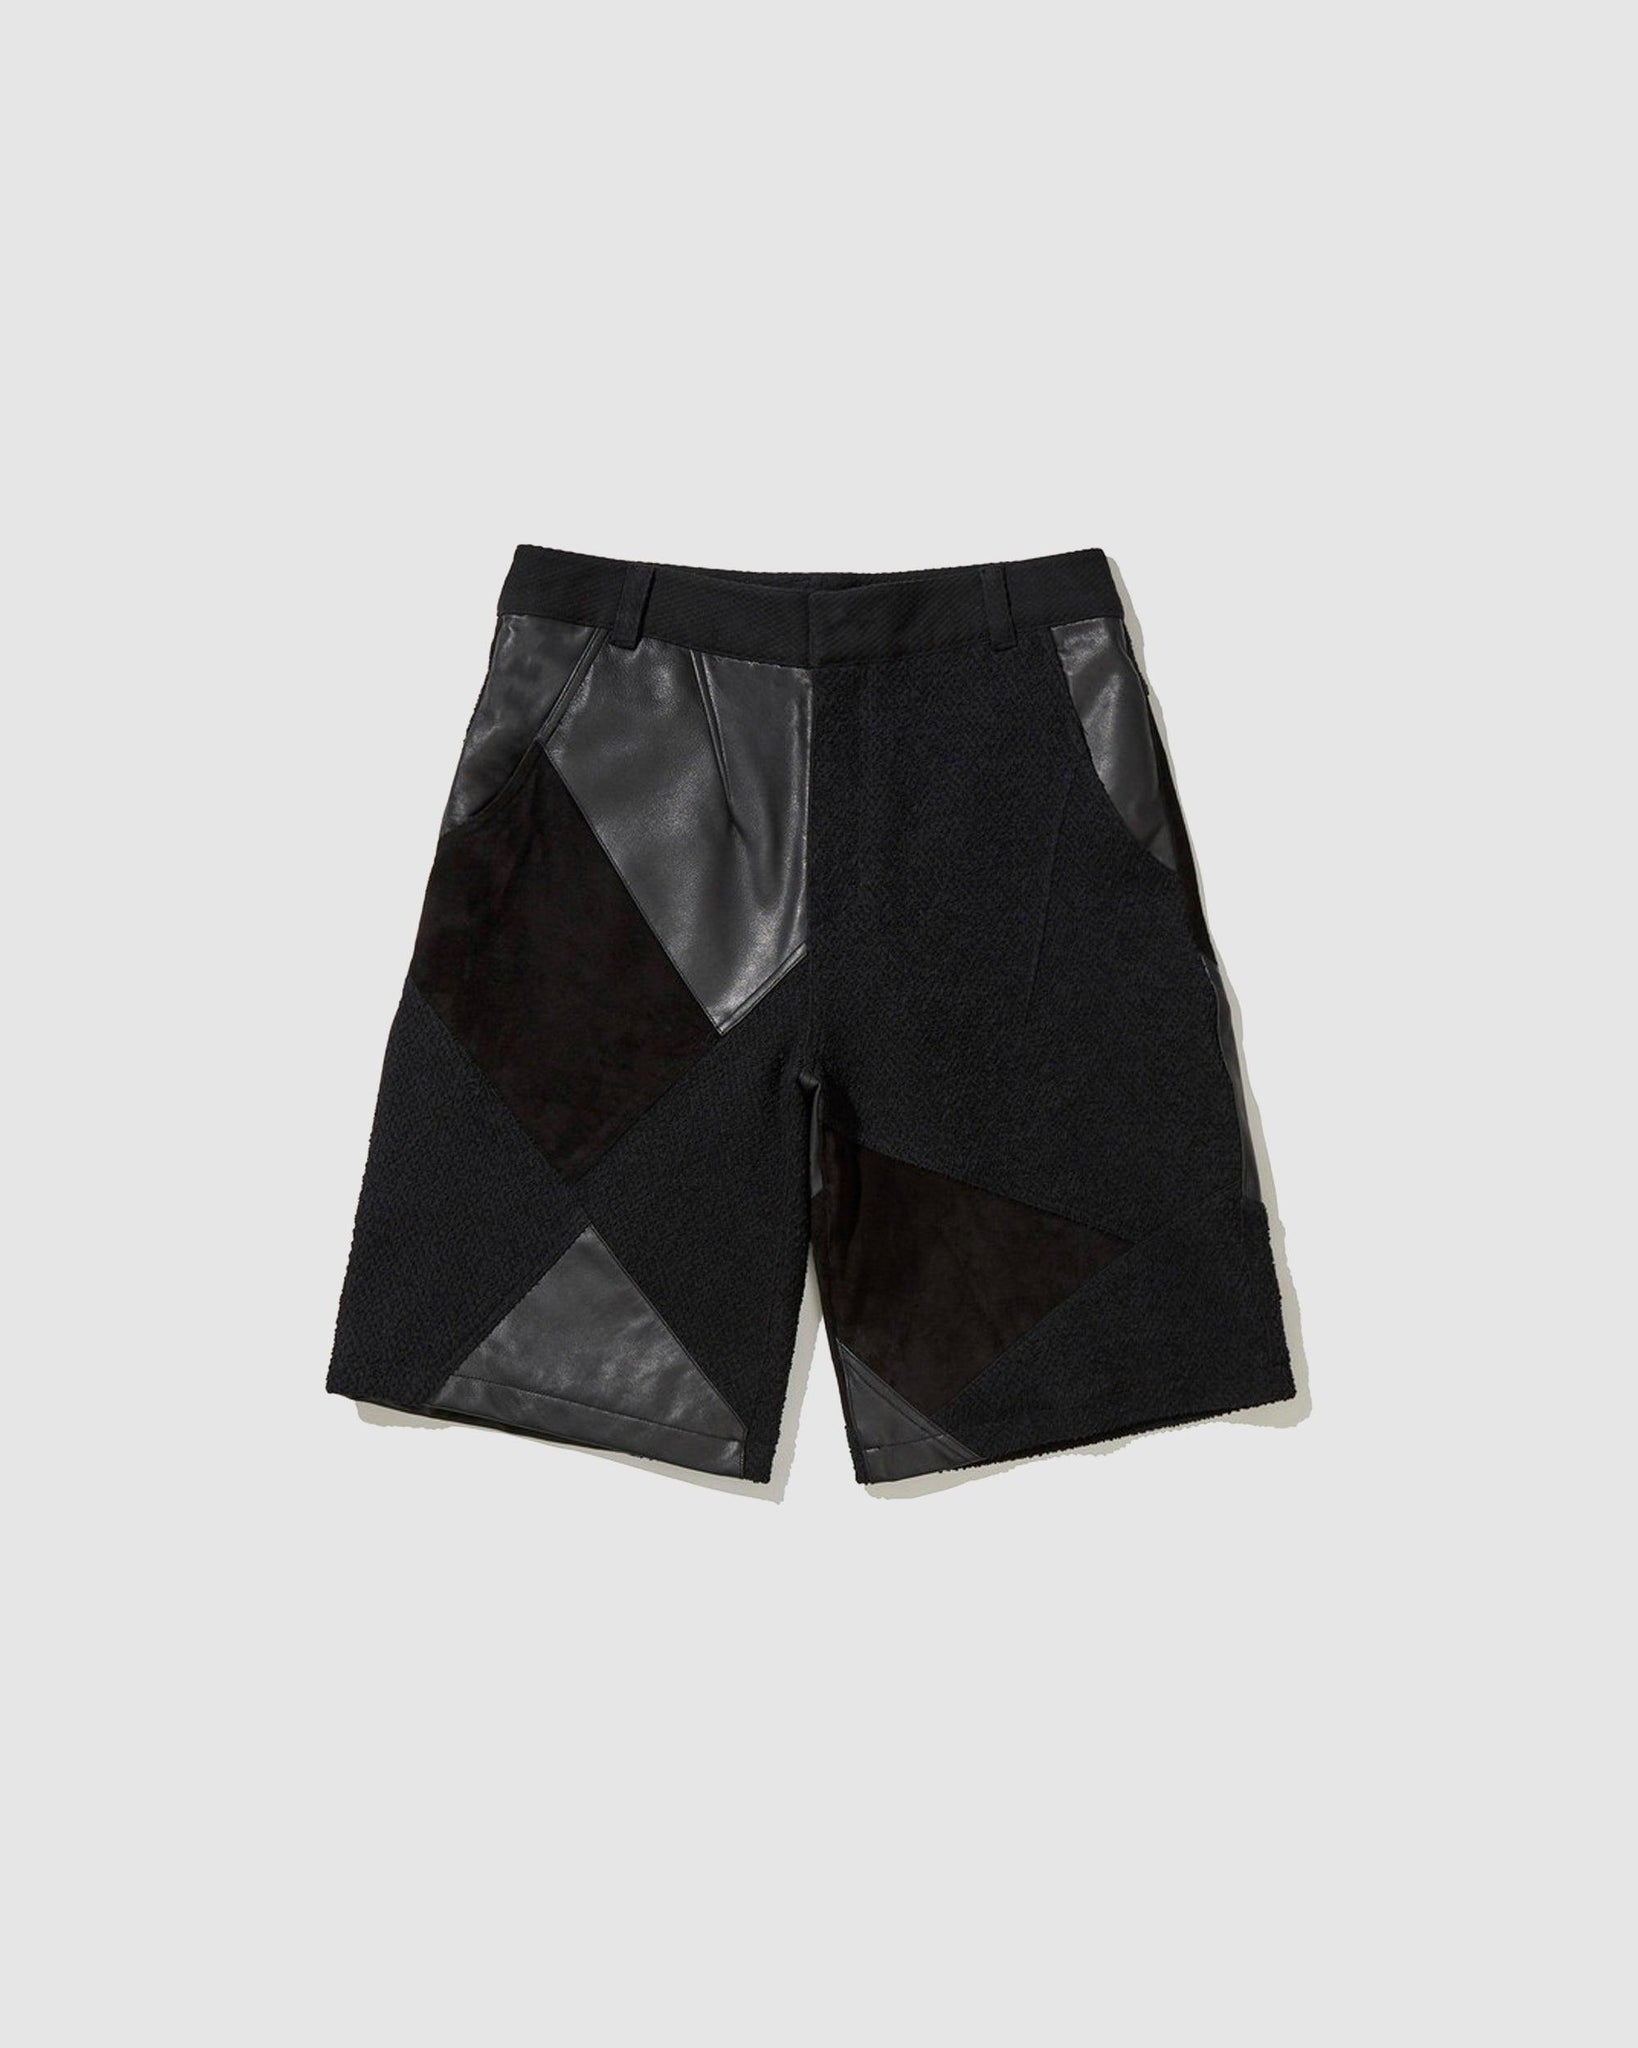 01 Shorts Black - {{ collection.title }} - Chinatown Country Club 